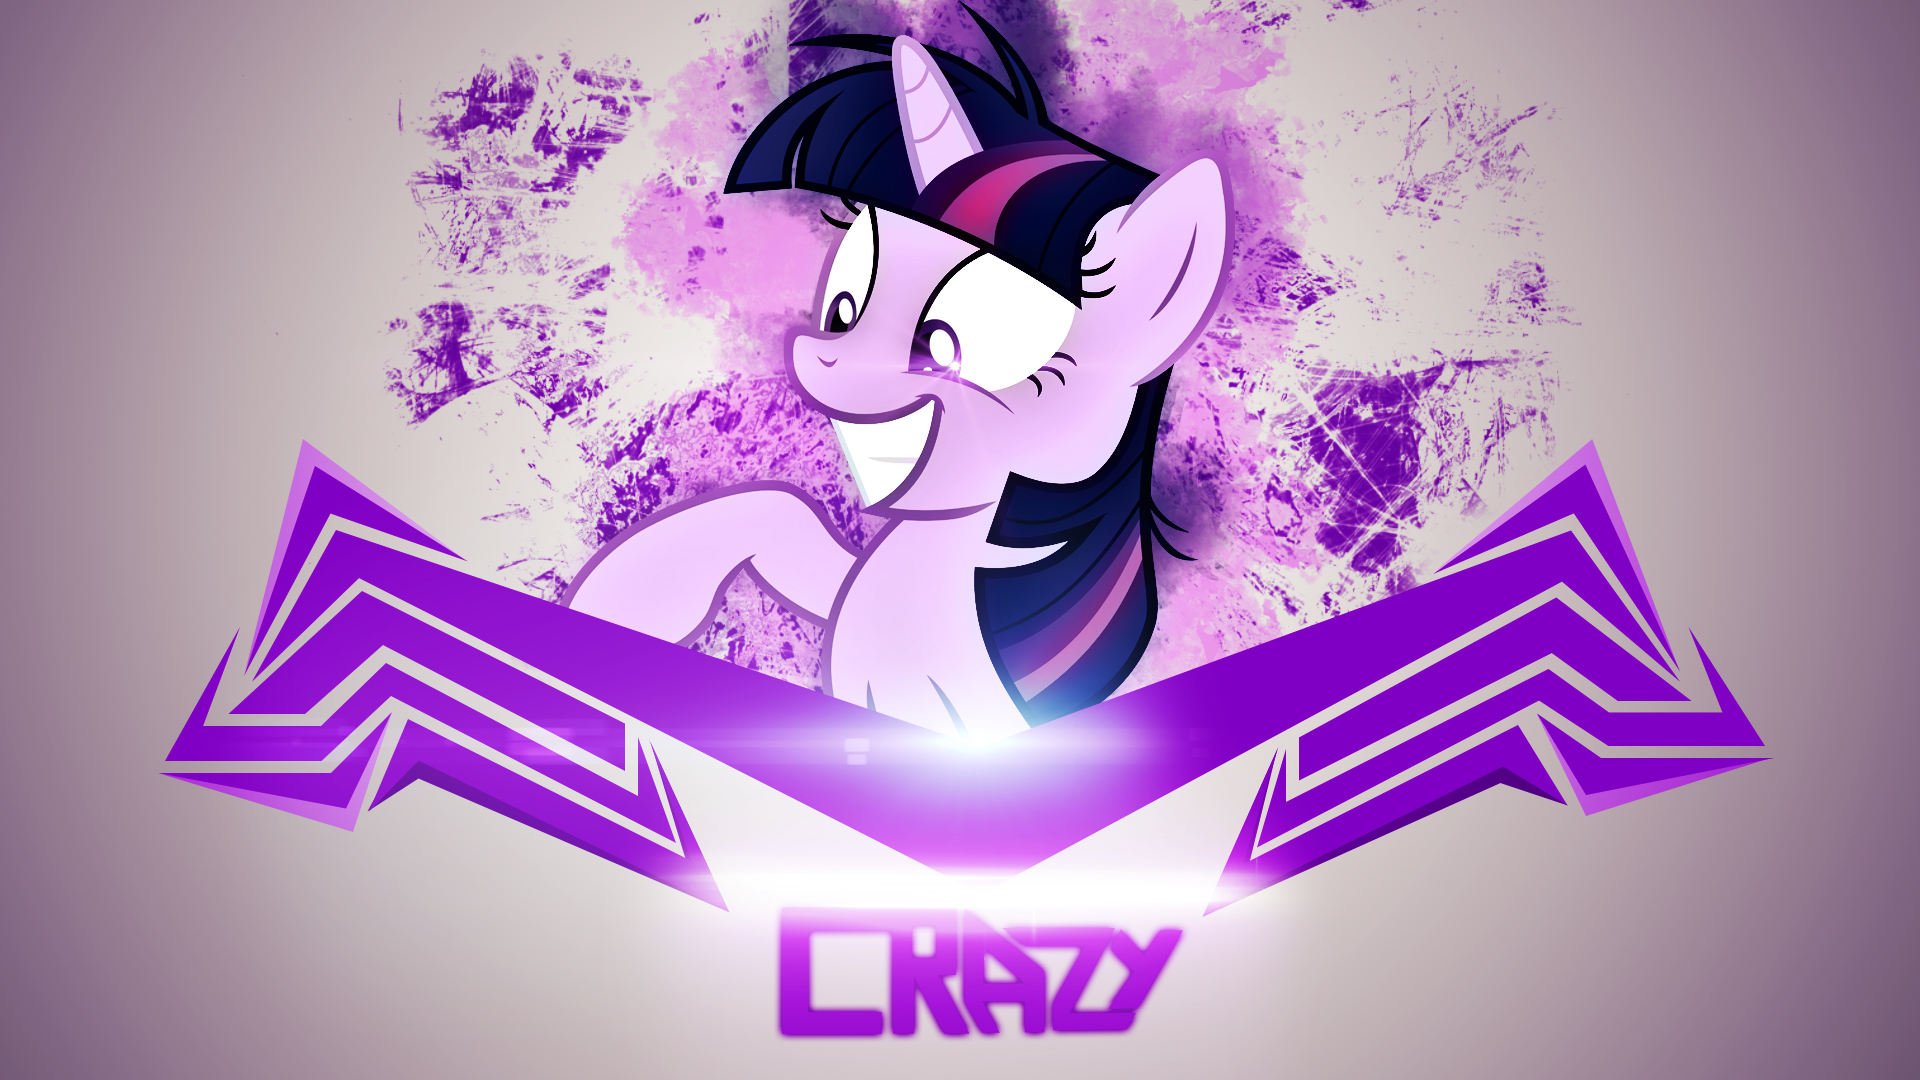 Crazy Like Twilight Sparkle by Karl97 and Thorinair